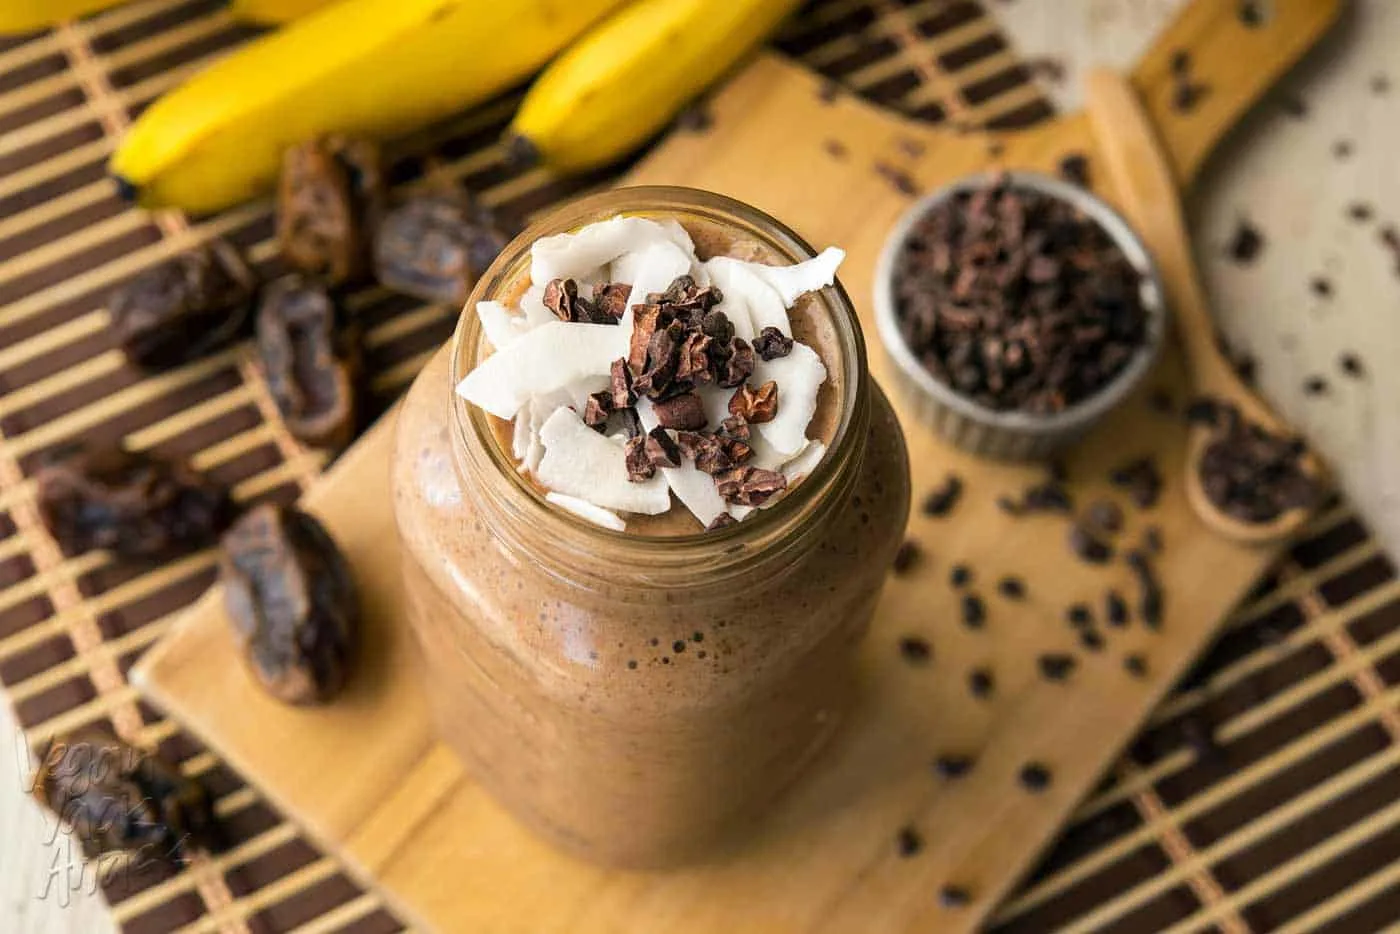 Large jar filled with banana cacao recovery smoothie, on a bread board surrounded by ingredients